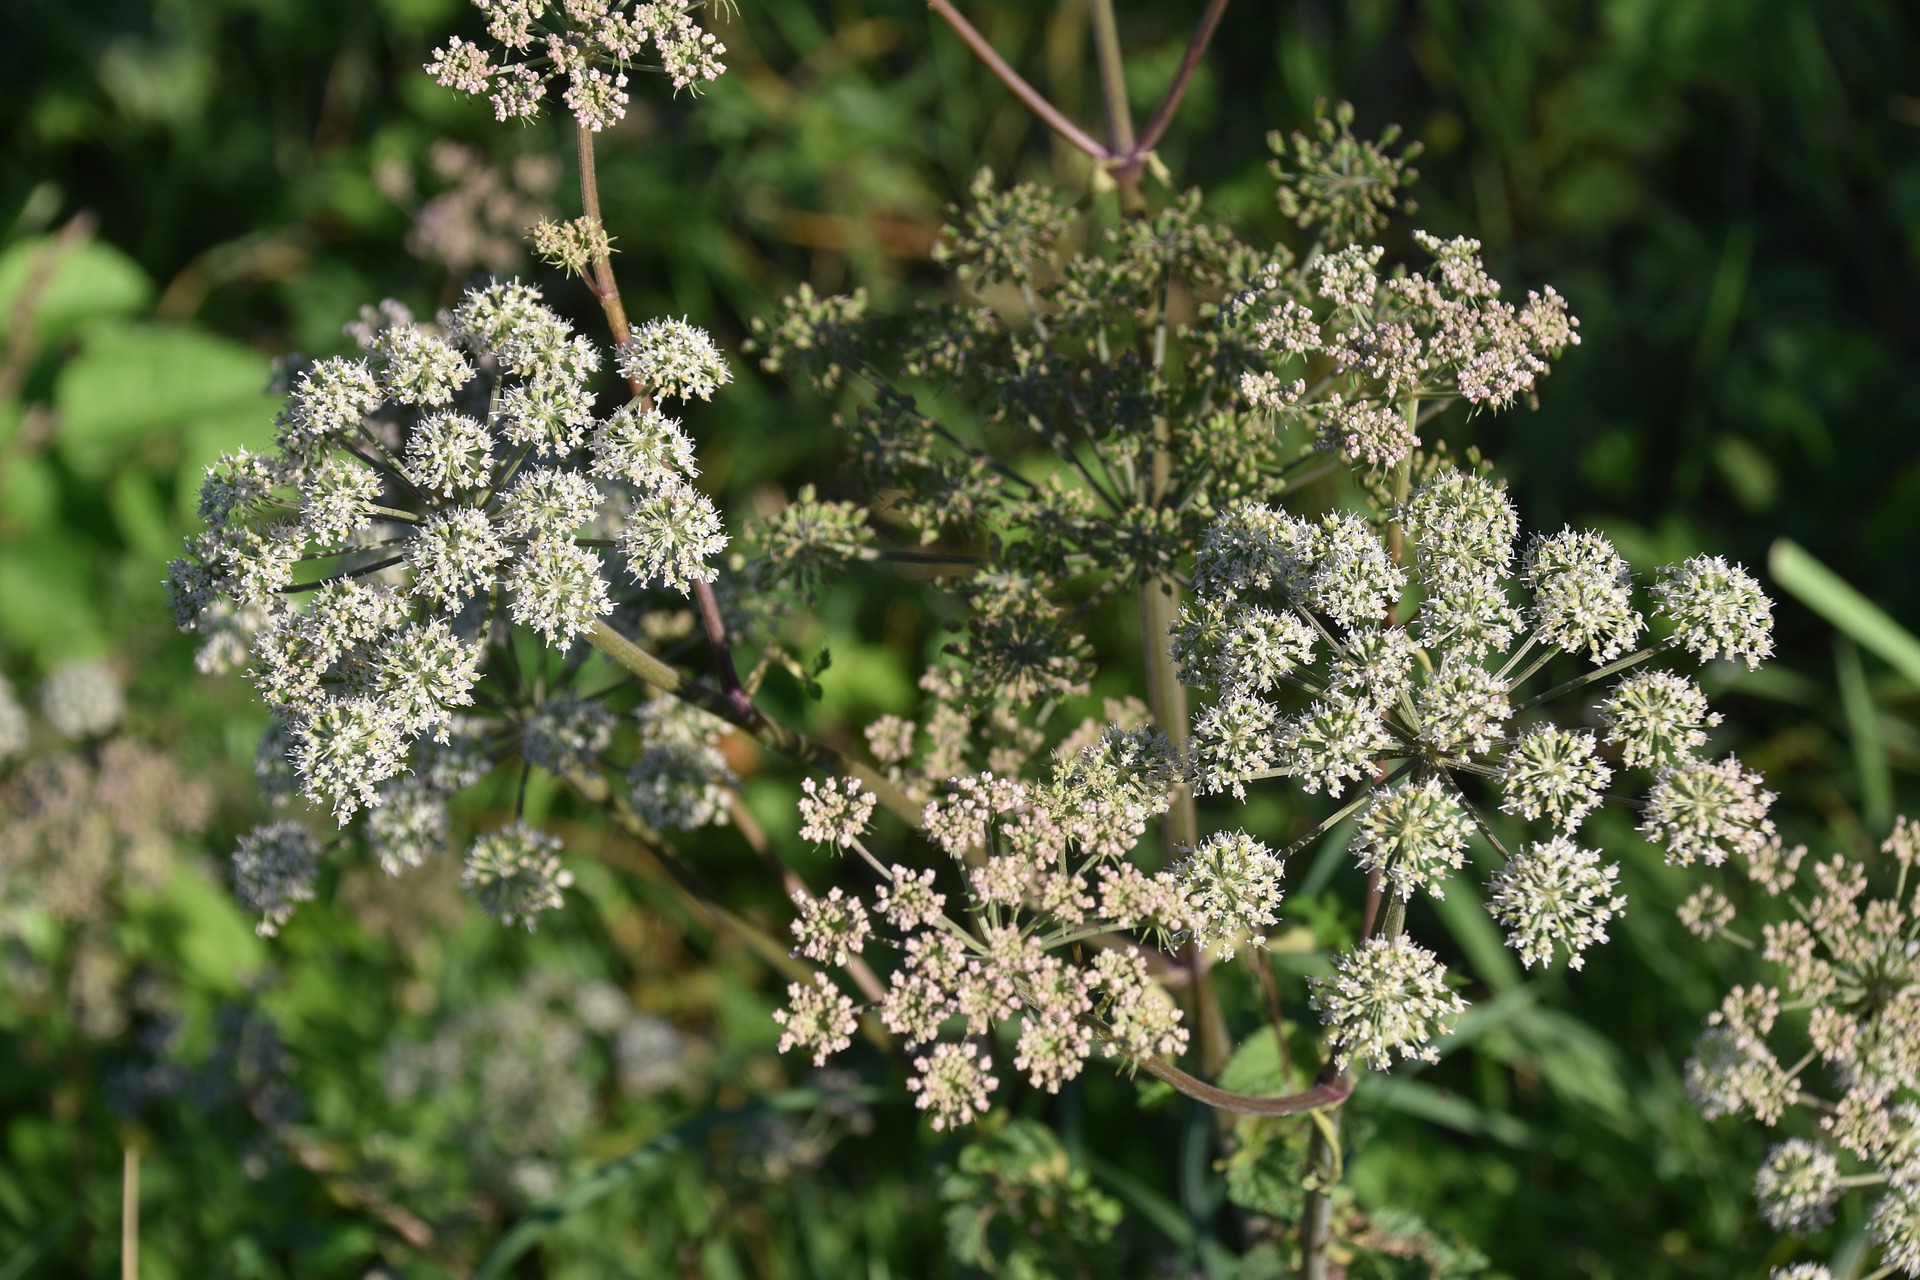 Learn how to identify Queen Anne's Lace, then play with it in the kitchen.